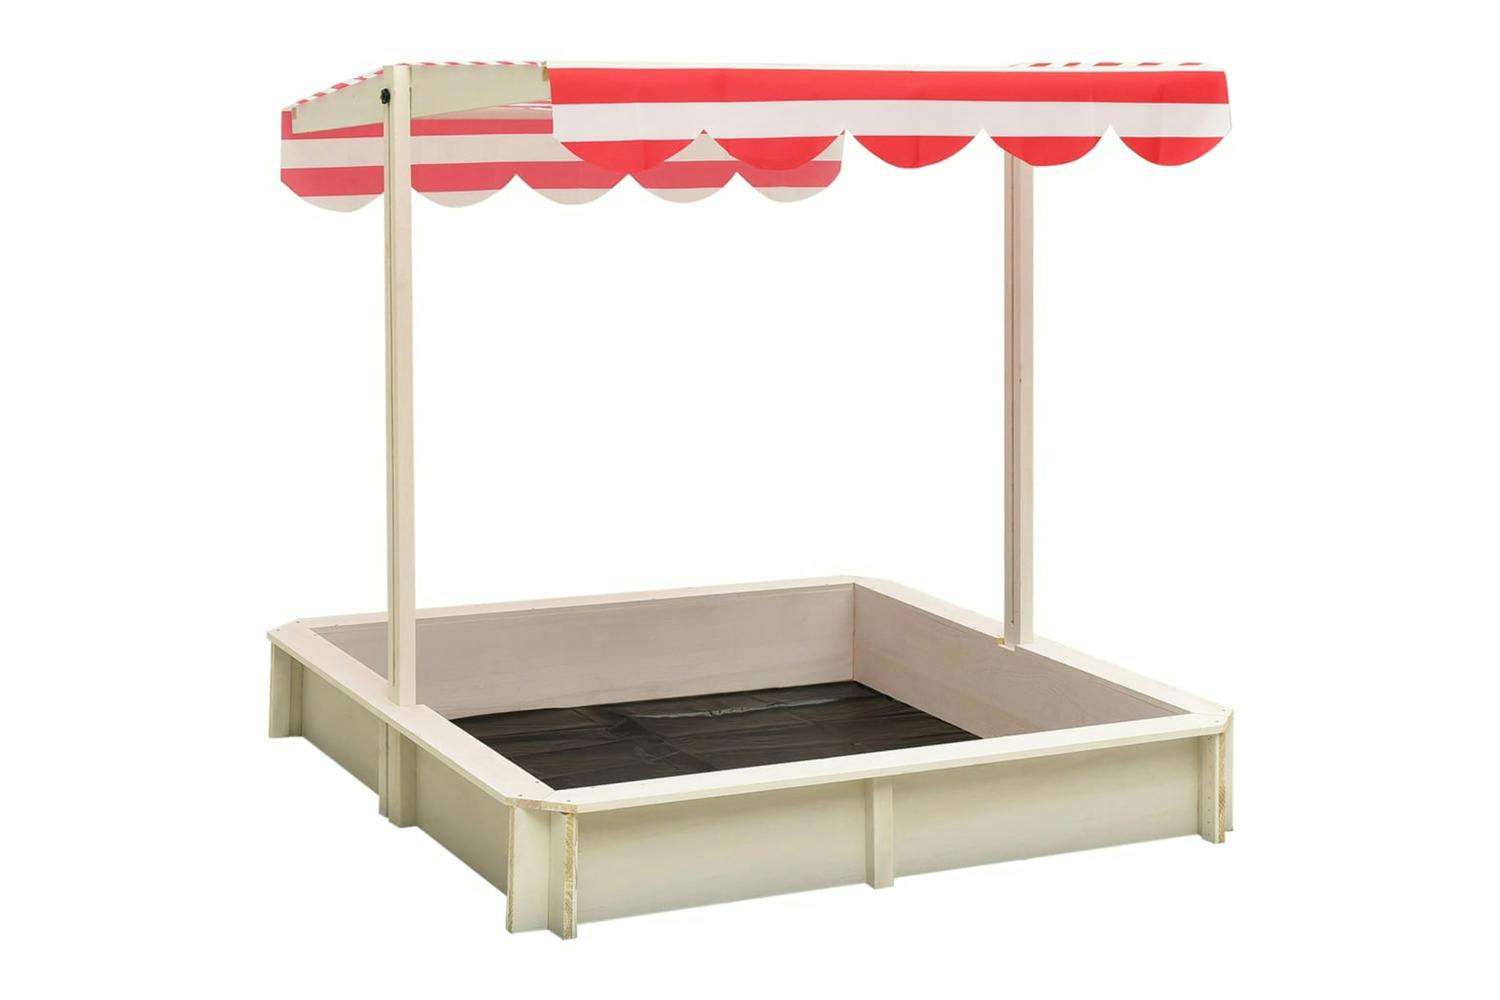 Vidaxl 316476 Sandbox With Adjustable Roof Fir Wood White And Red Uv50